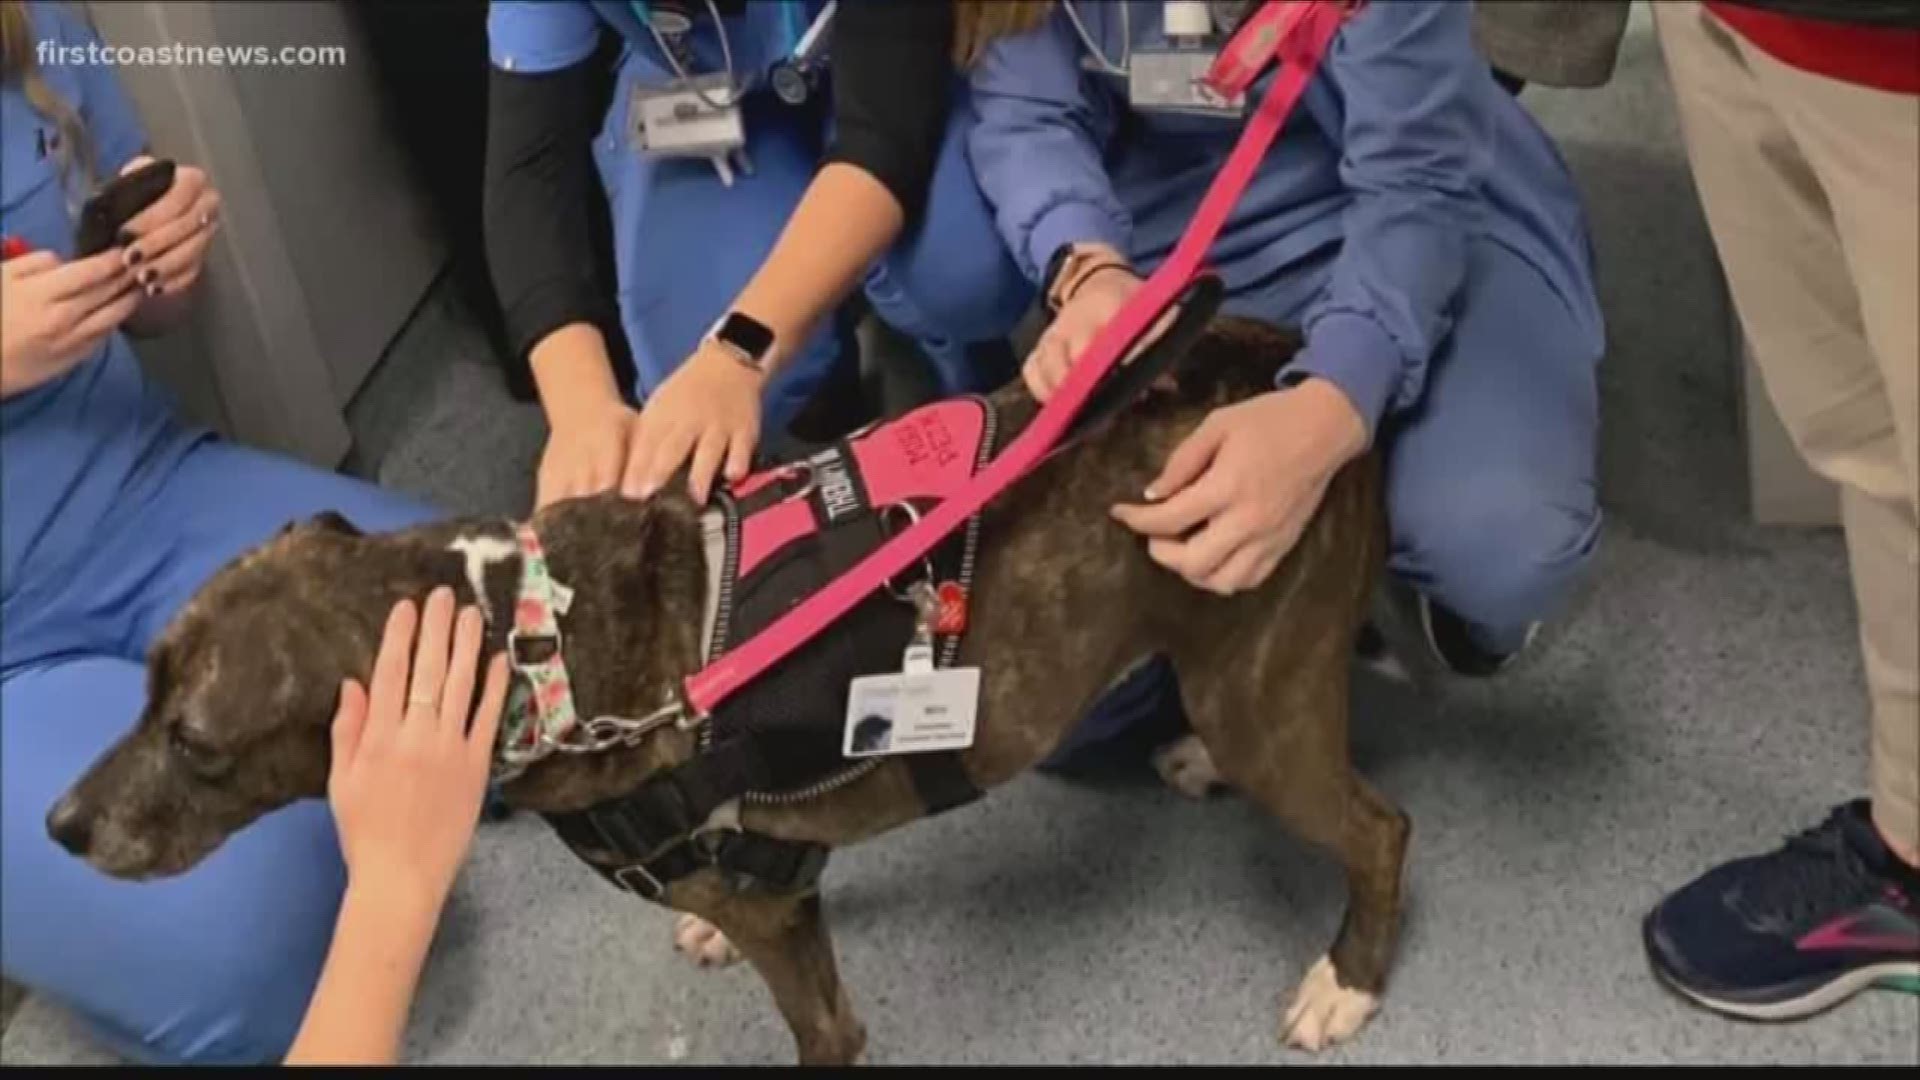 On March 7 at UNF, the Therapy Animal Coalition will be holding their annual expo to highlight the certifications & volunteer opportunities for animals.